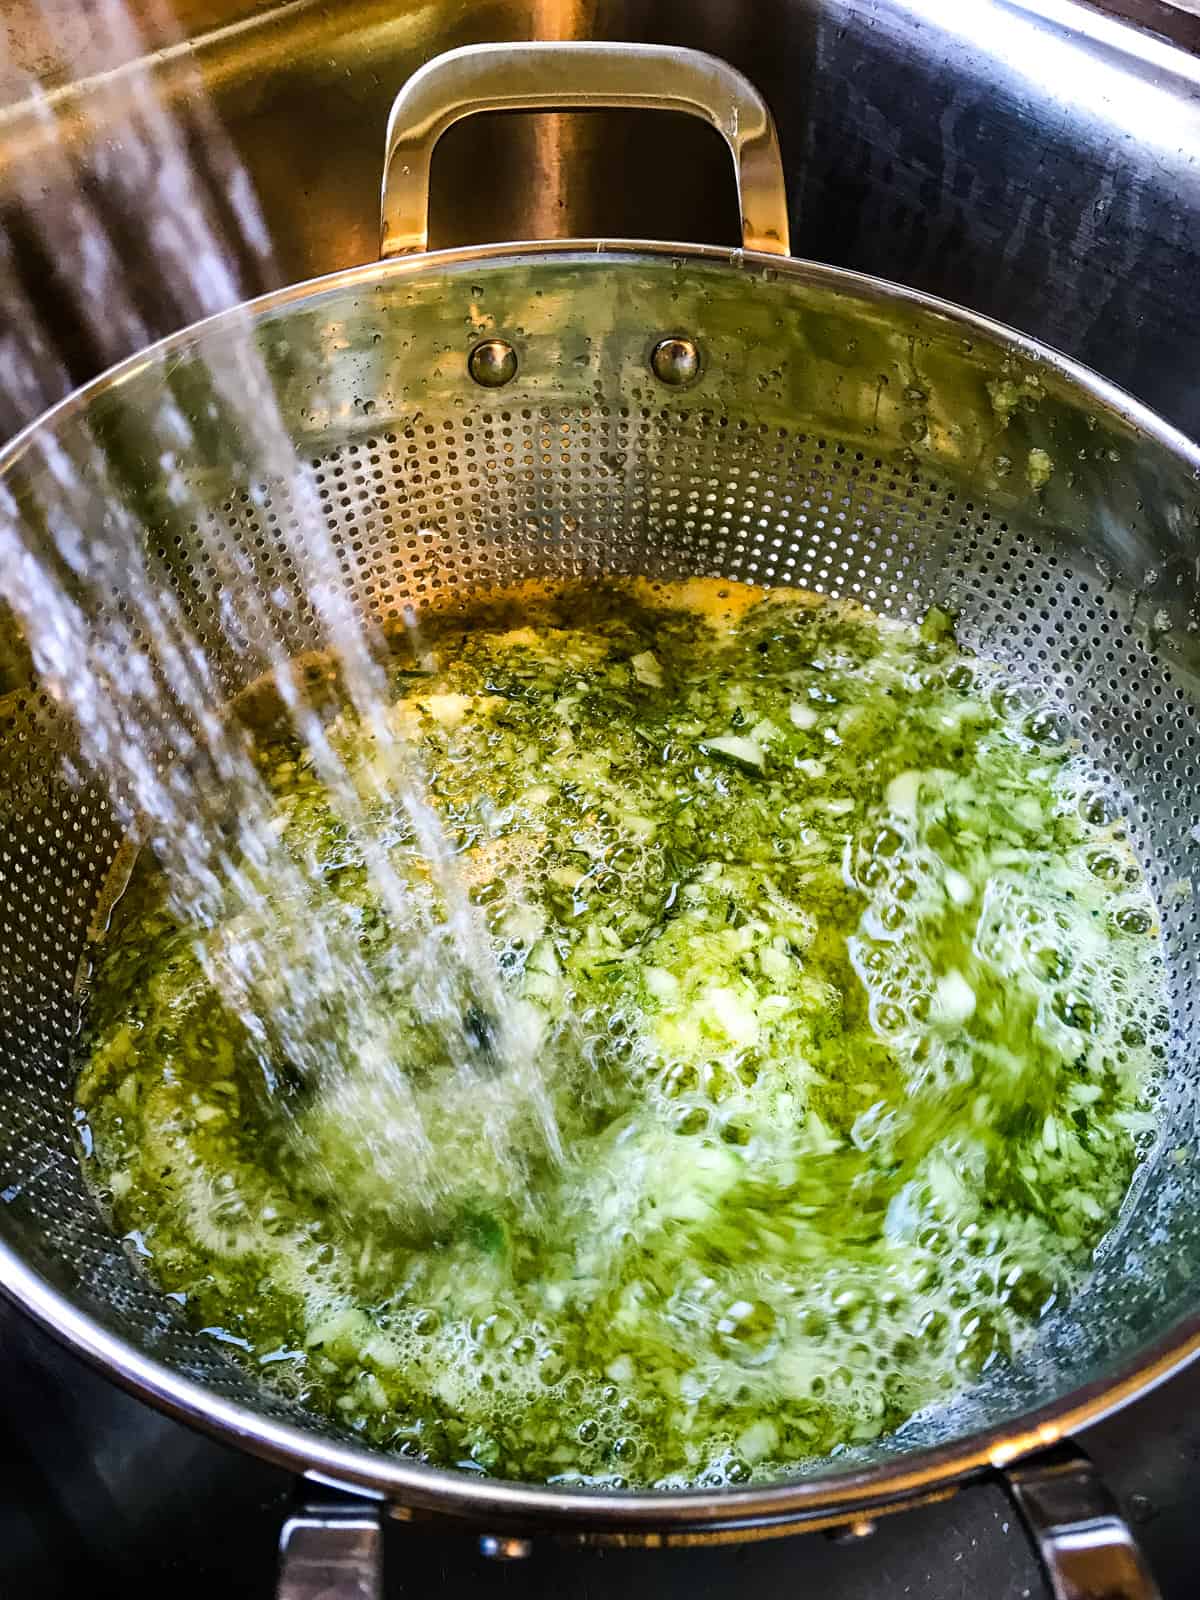 Dill relish being rinsed in a colander.